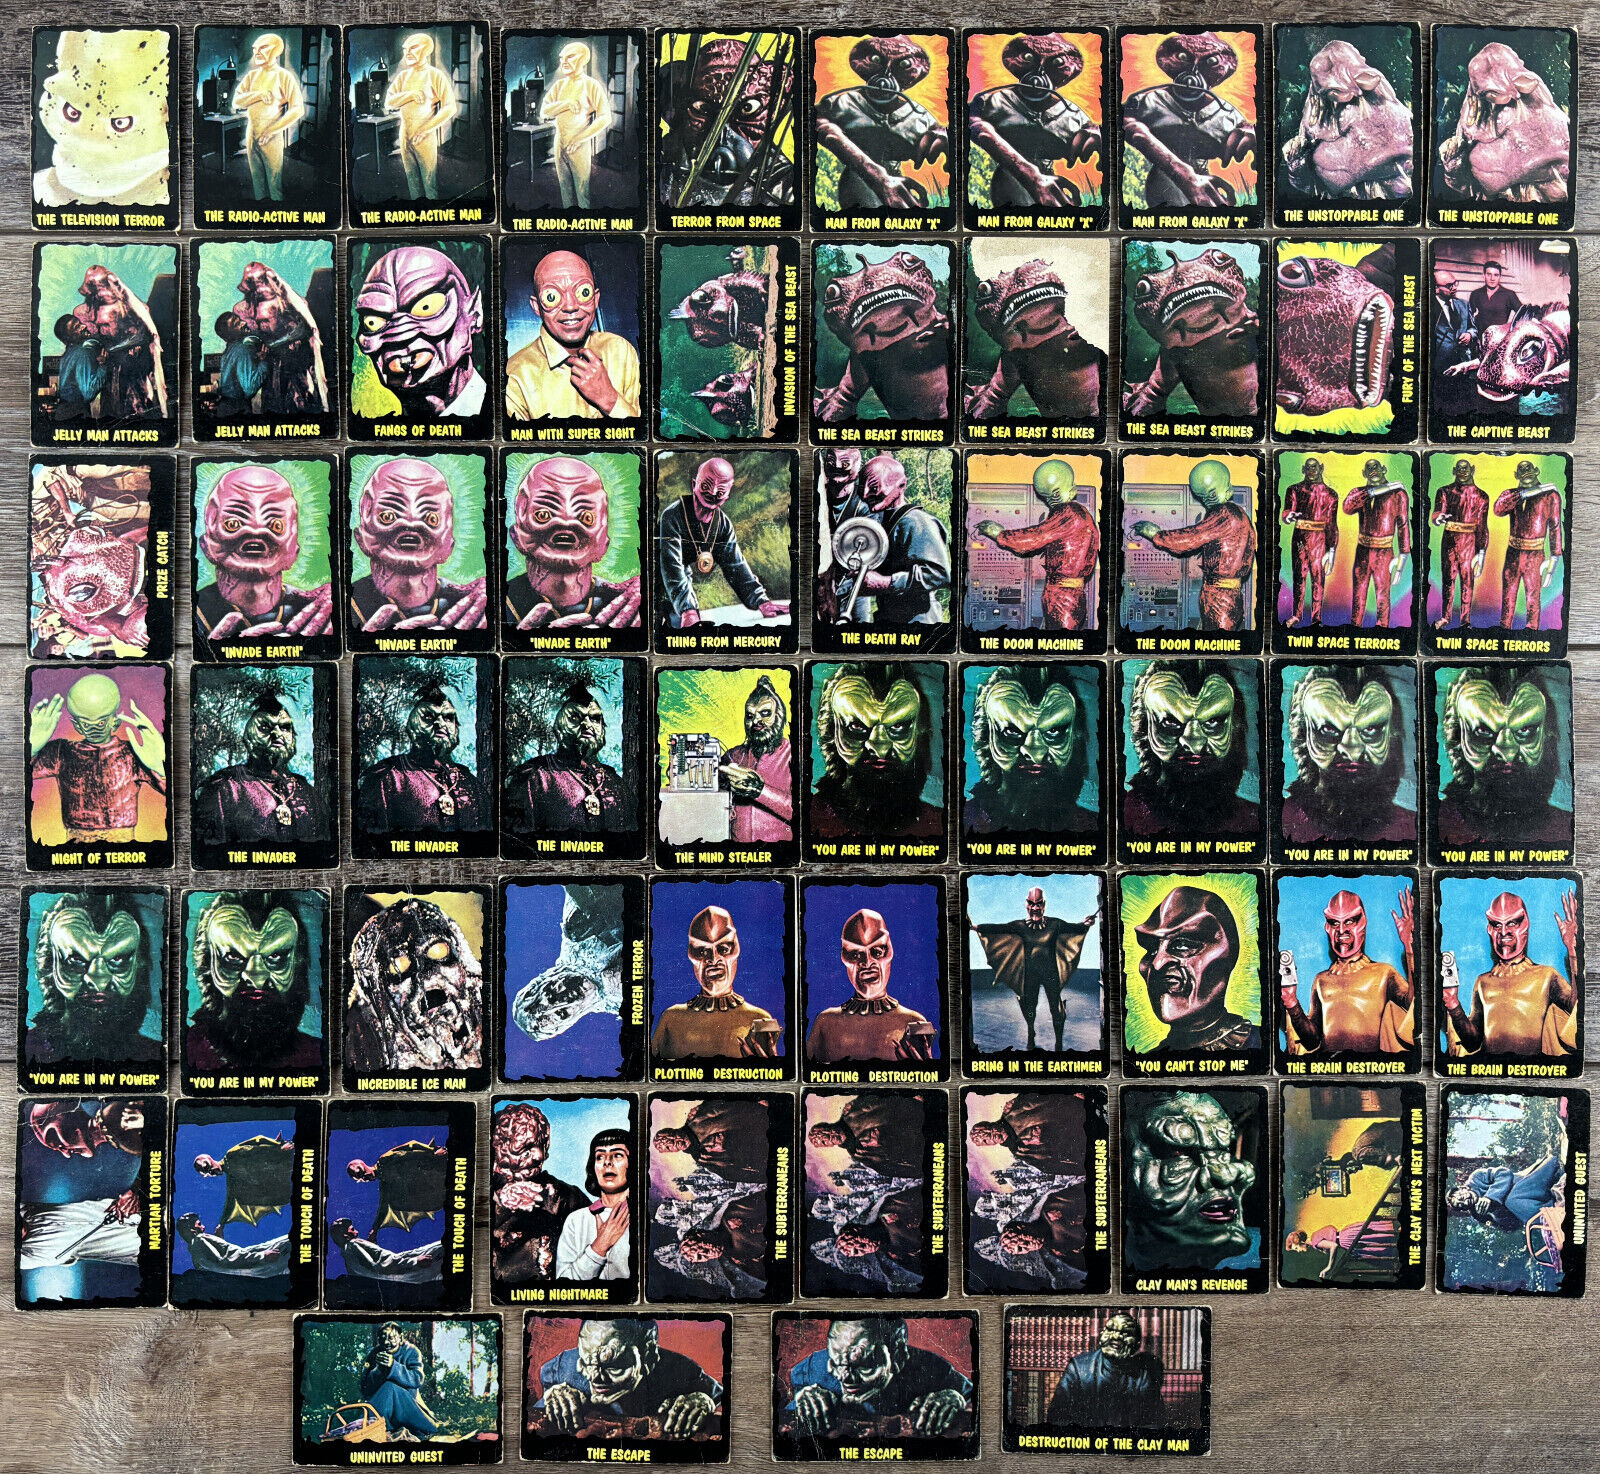 1964 Bubbles Inc The Outer Limits Trading Cards Lot of 64 (38 Diff.) - Poor - VG